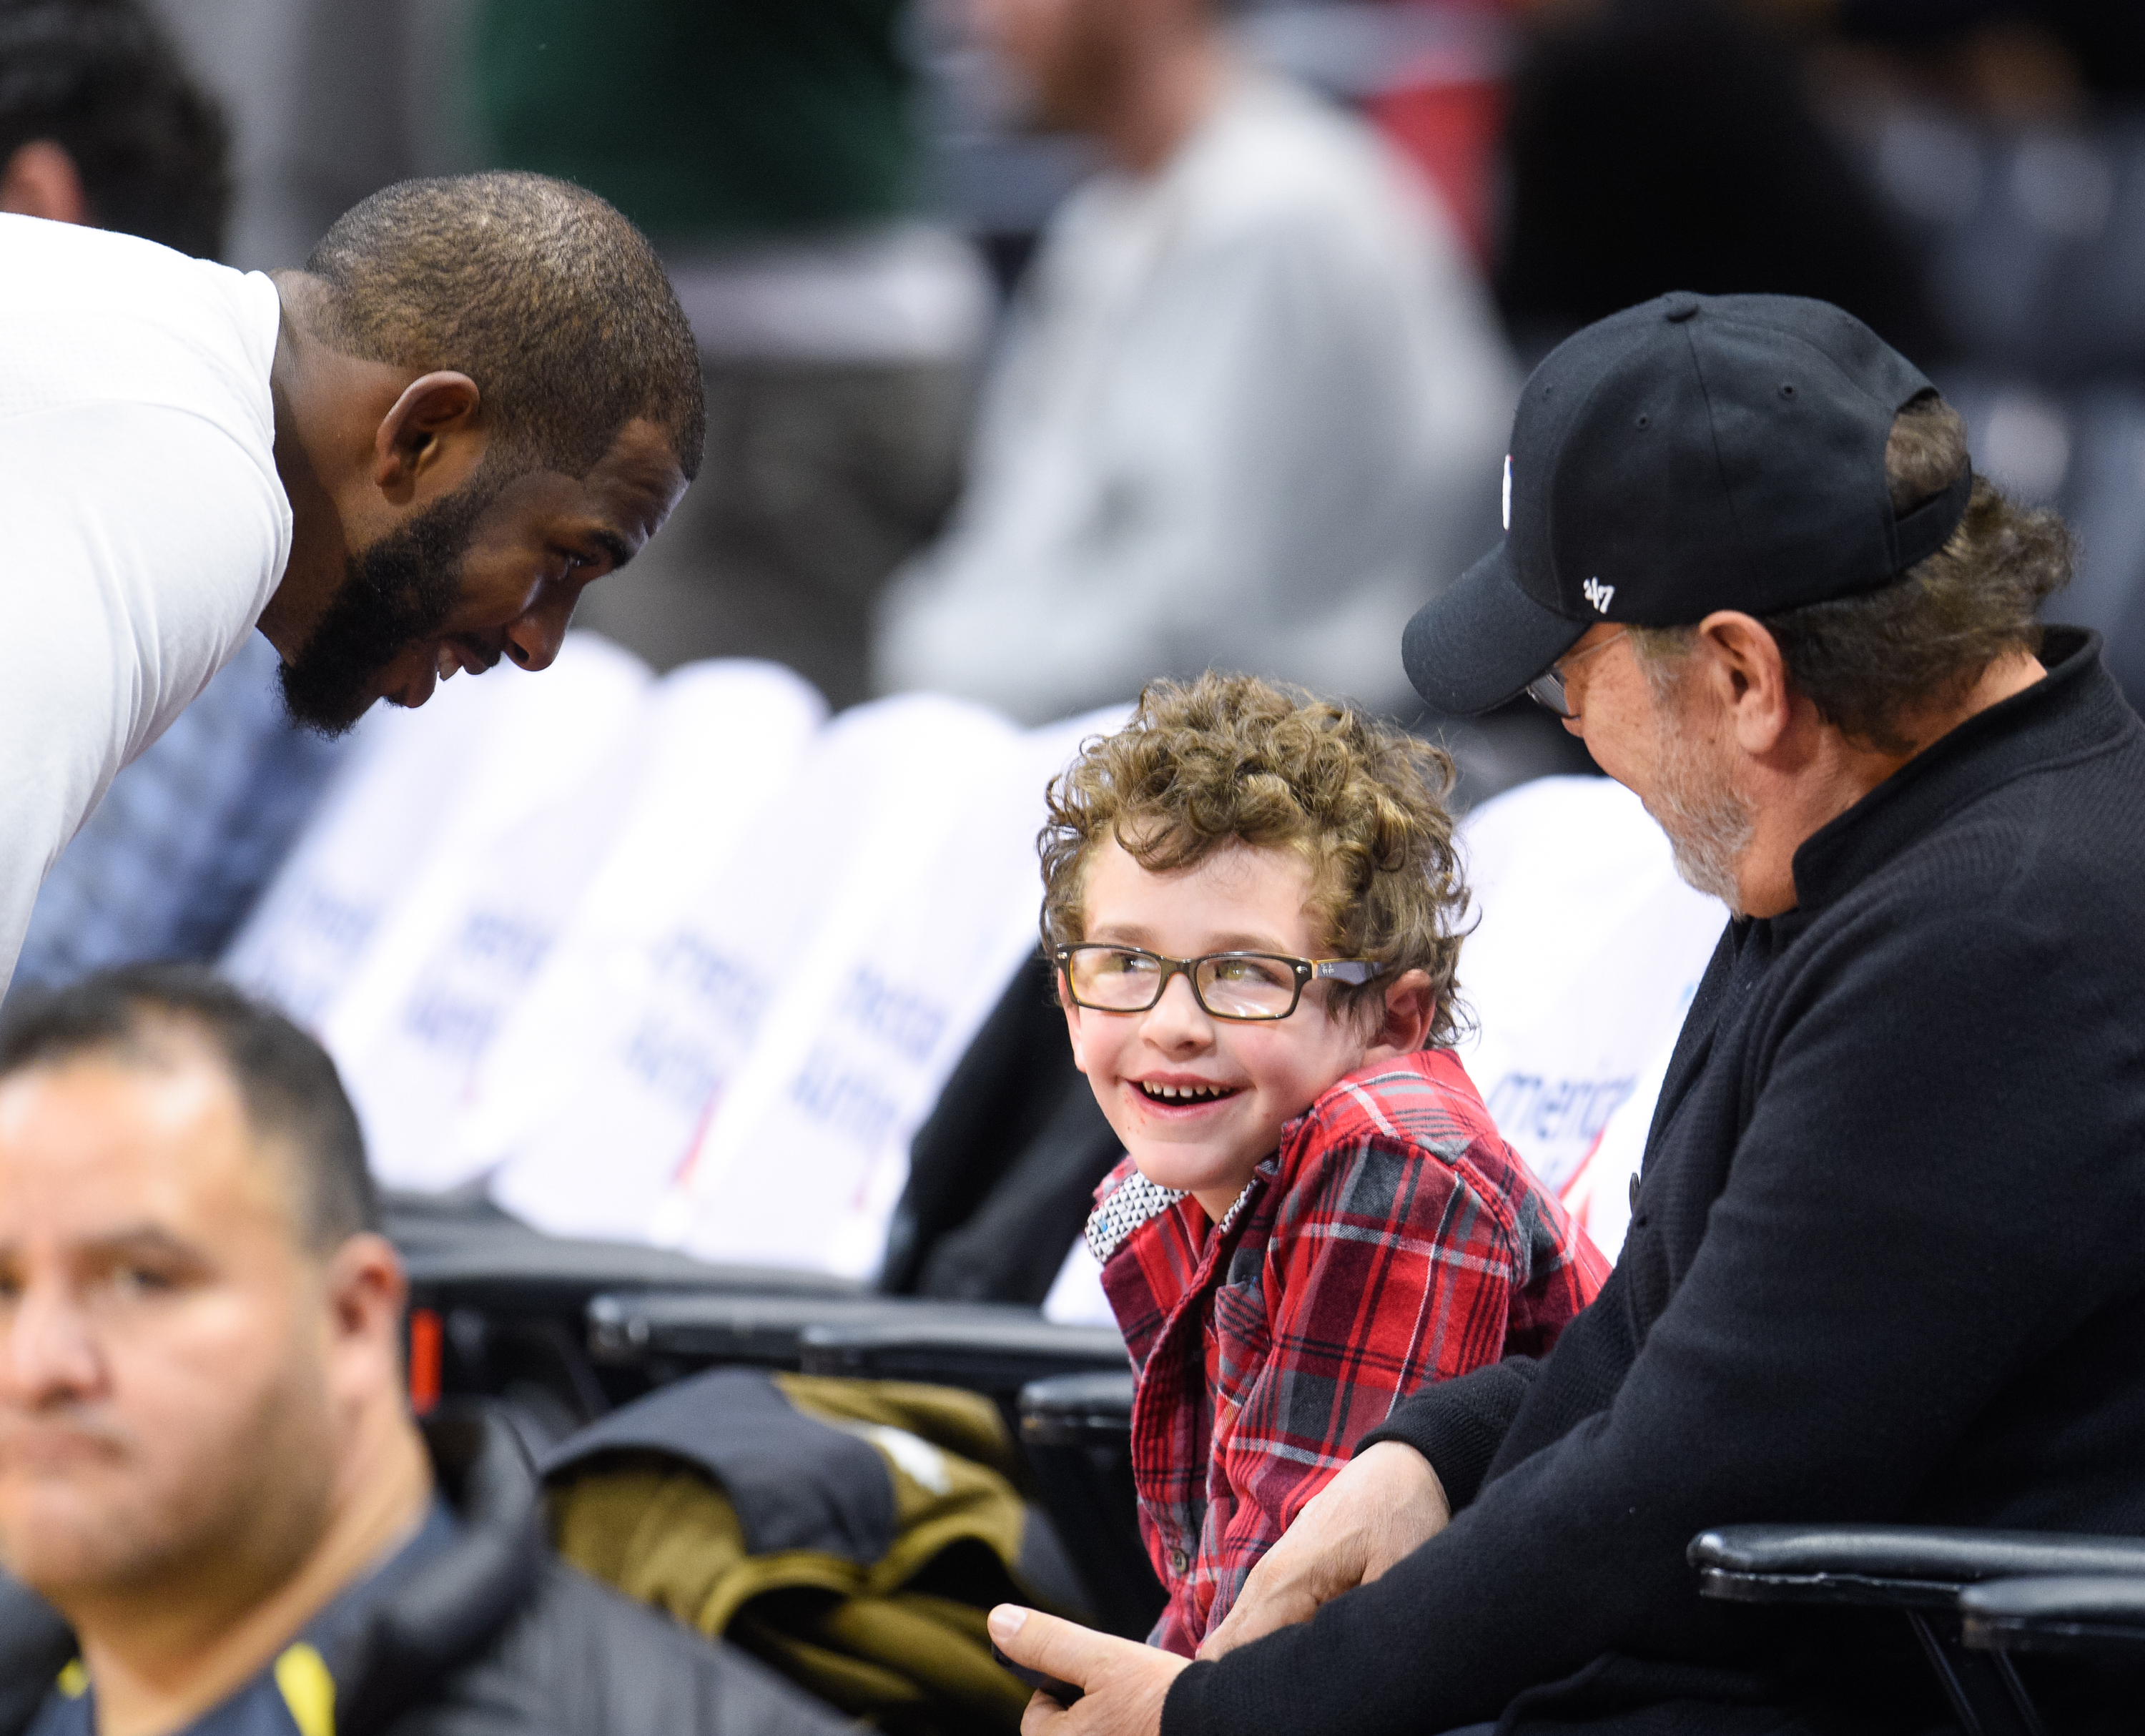 Chris Paul talking to Billy Crystal's grandson at a basketball game at Staples Center on November 29, 2015, in Los Angeles, California | Source: Getty Images